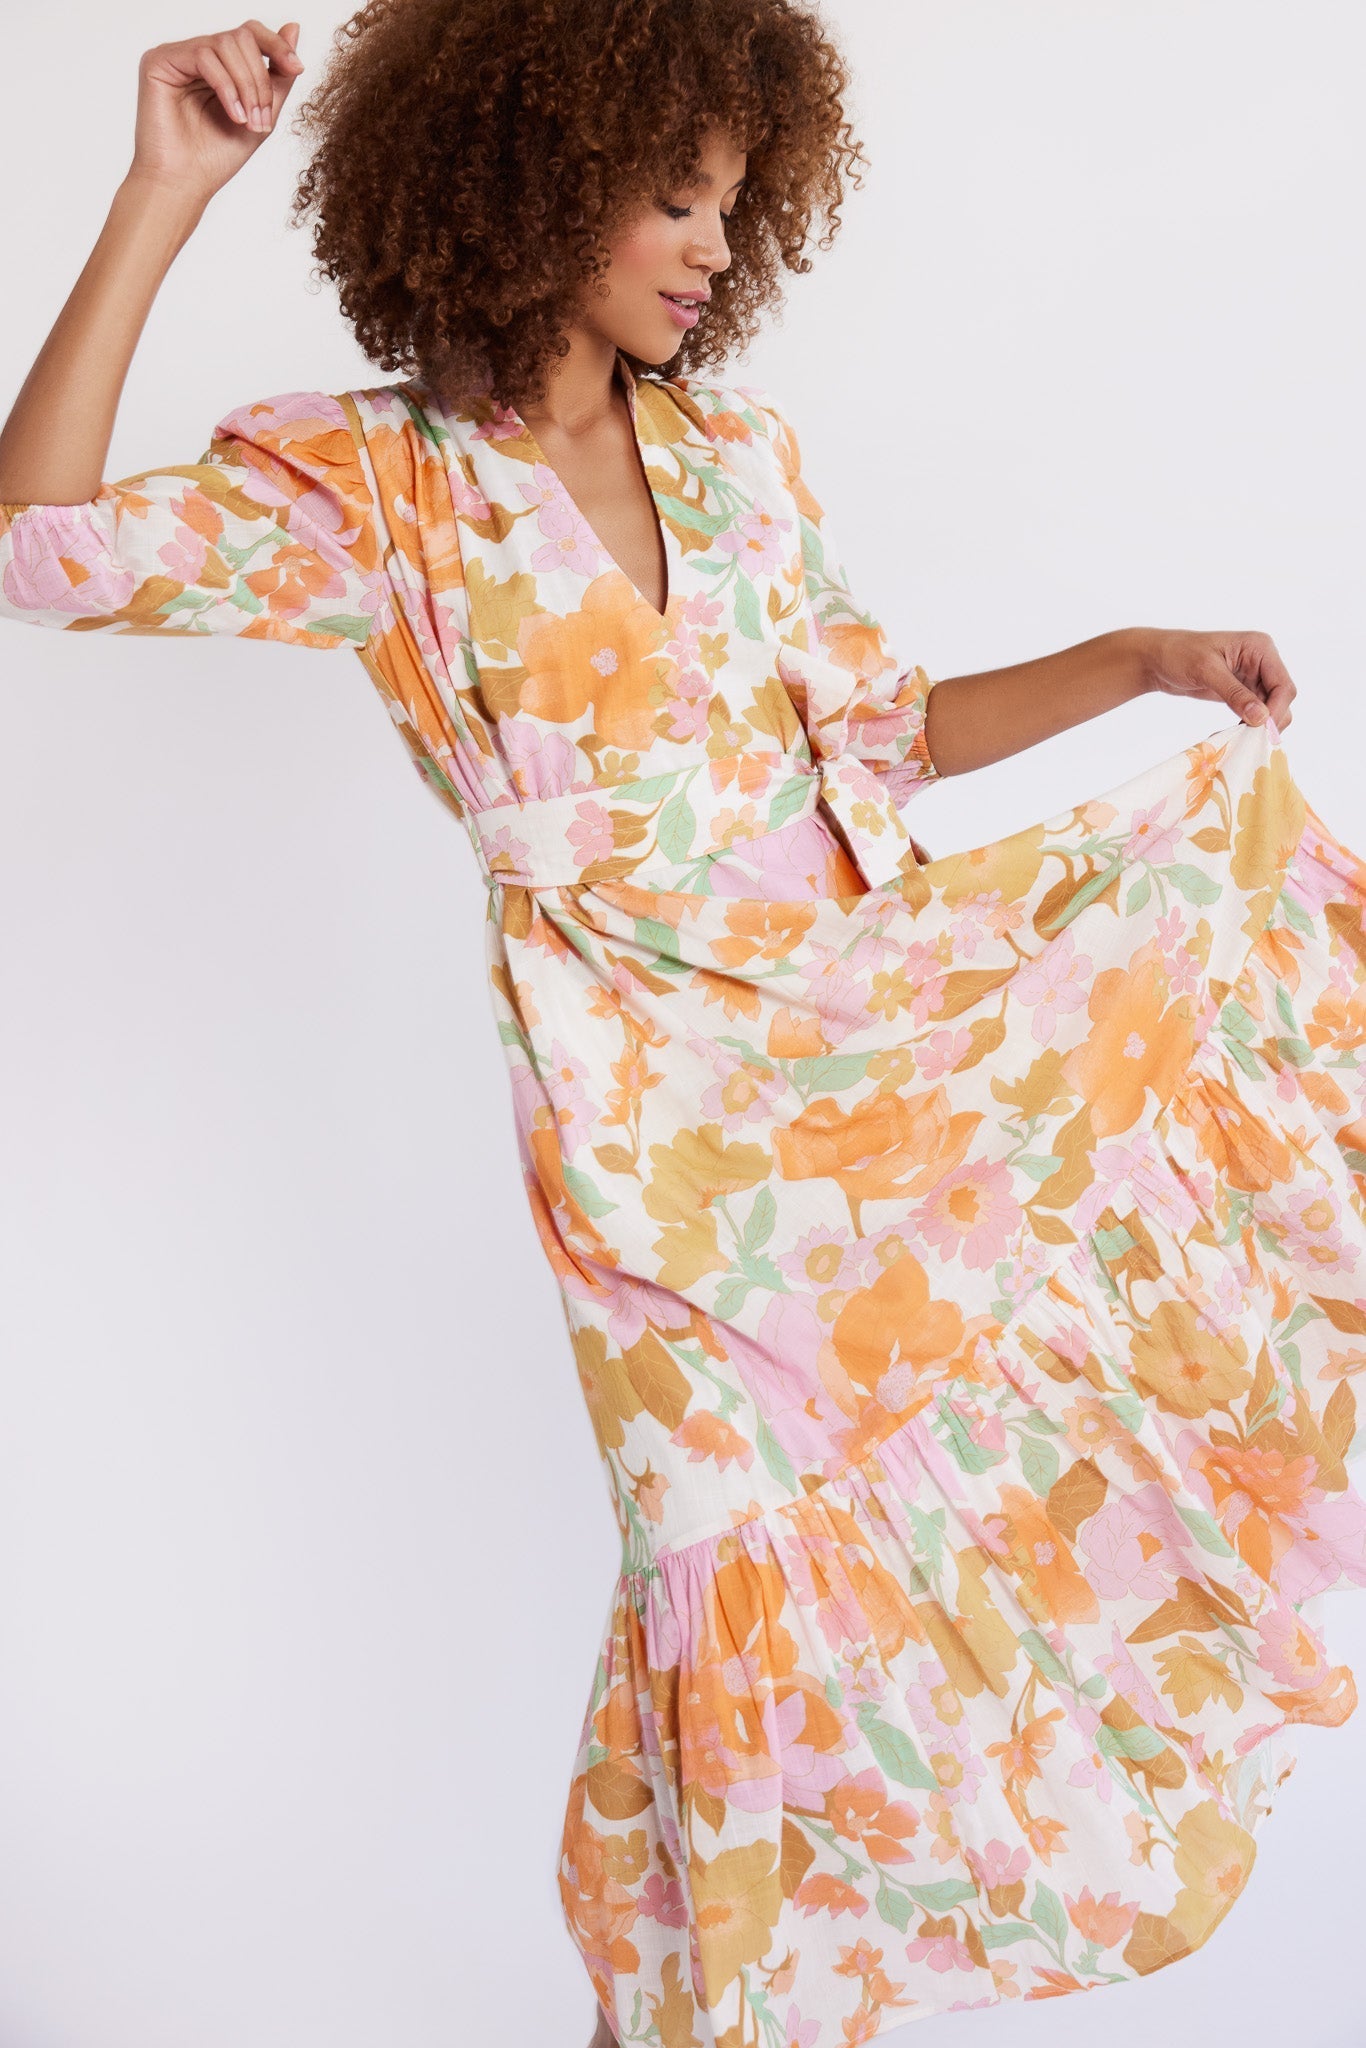 MILLE Clothing Ada Dress in Harmony Floral